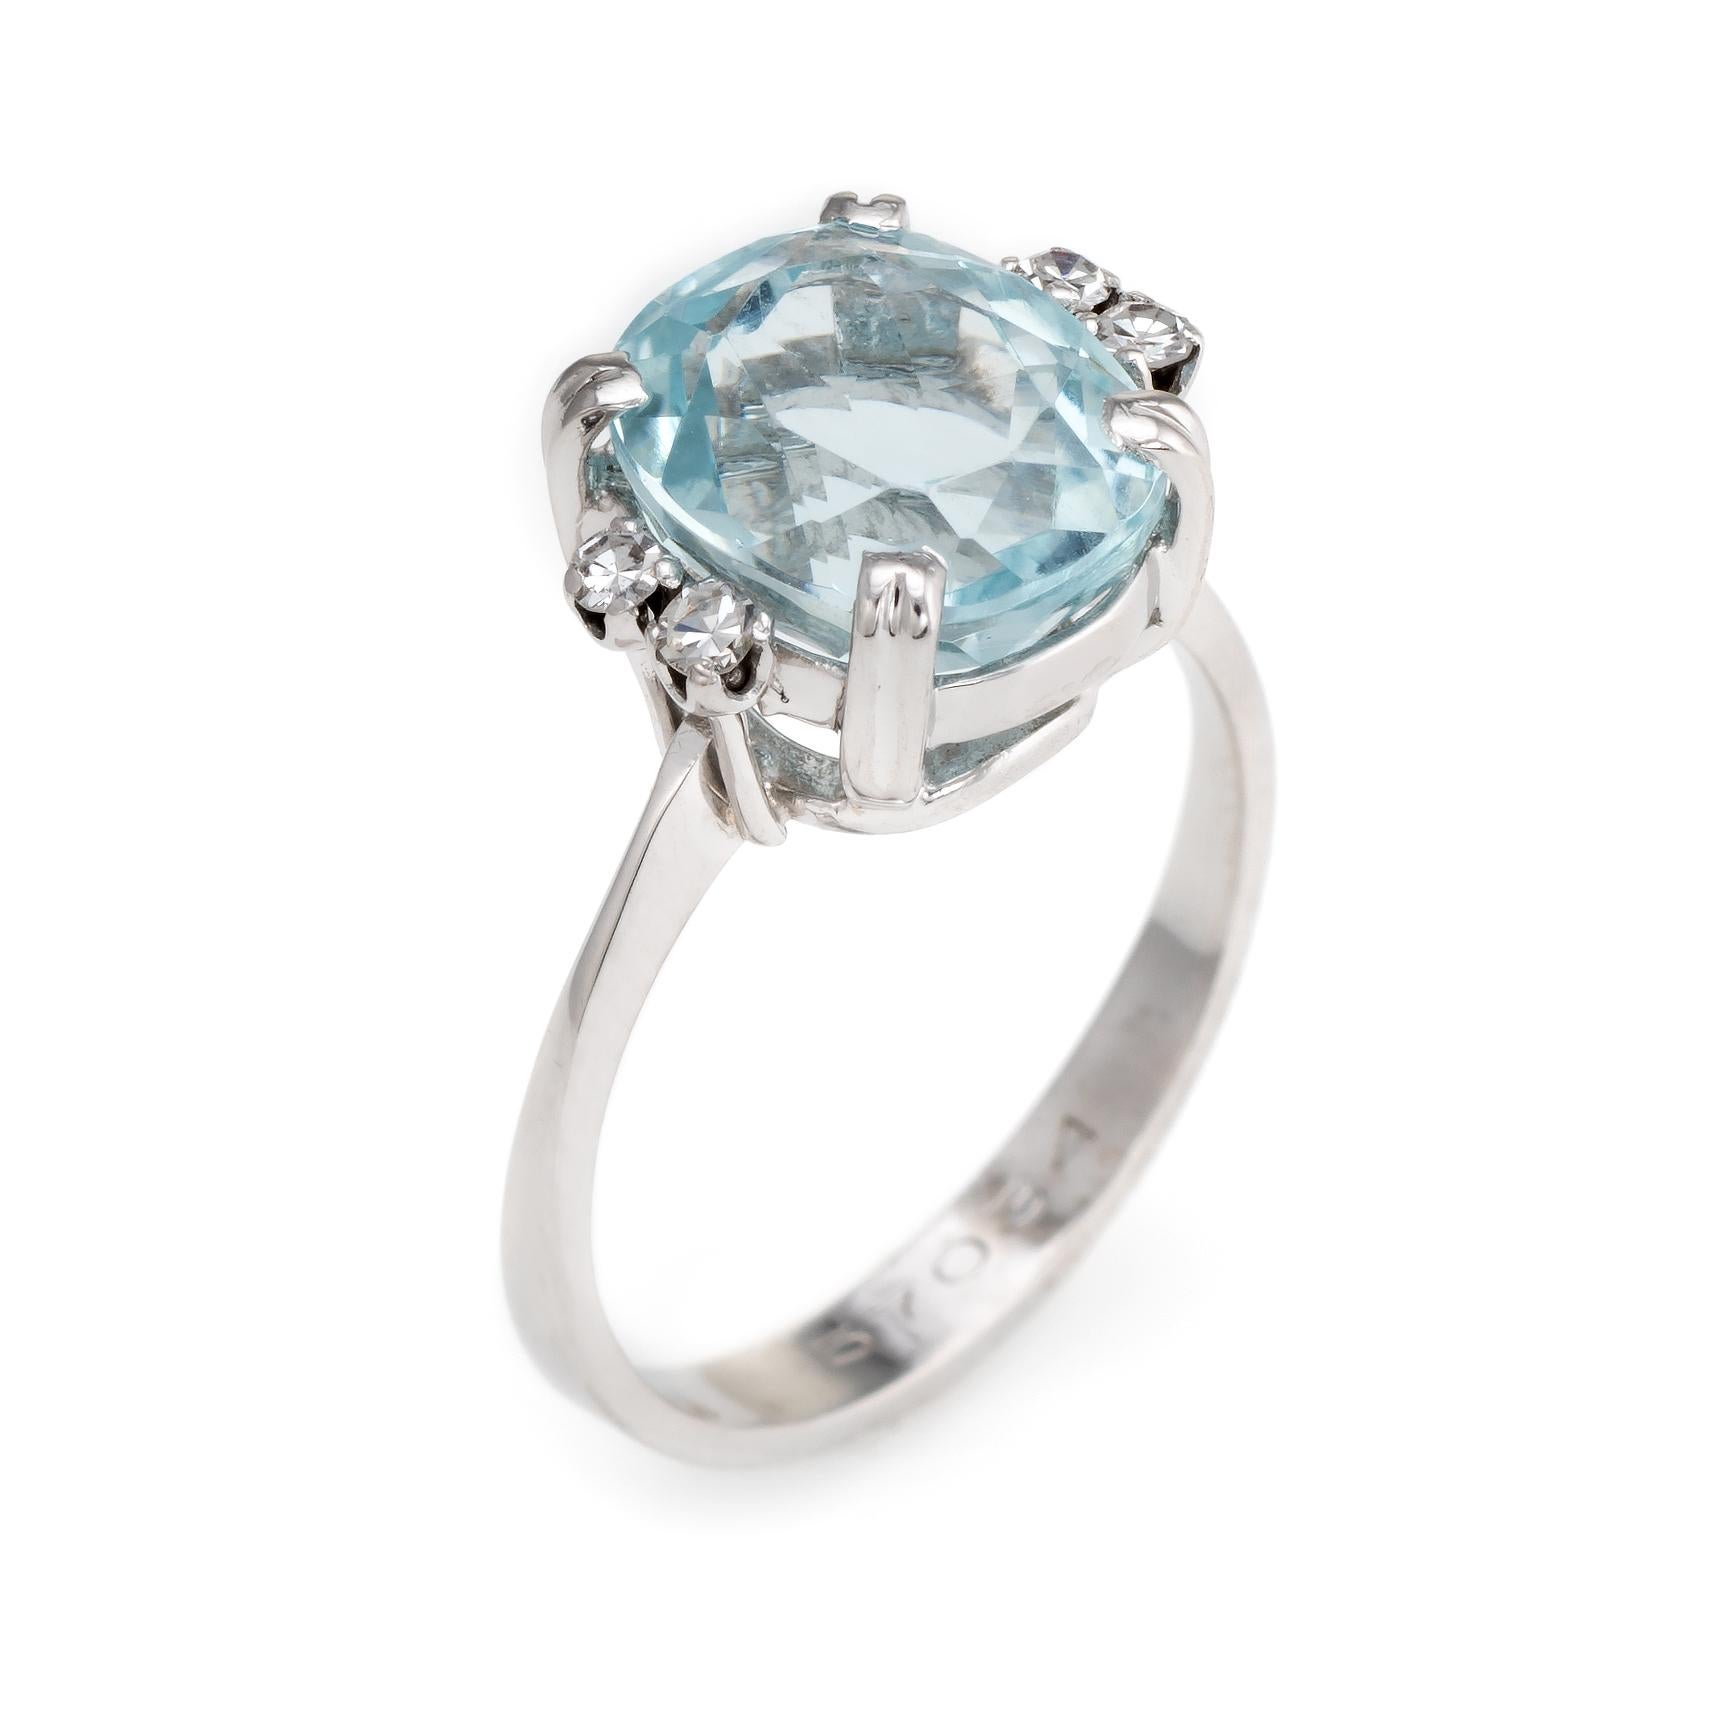 Finely detailed H Stern aquamarine & diamond ring (circa 1950s to 1960s), crafted in 18 karat white gold. 

Faceted oval cut aquamarine measures 10.5mm x 9mm (estimated at 5 carats), accented with four estimated 0.02 carat single cut diamonds. The